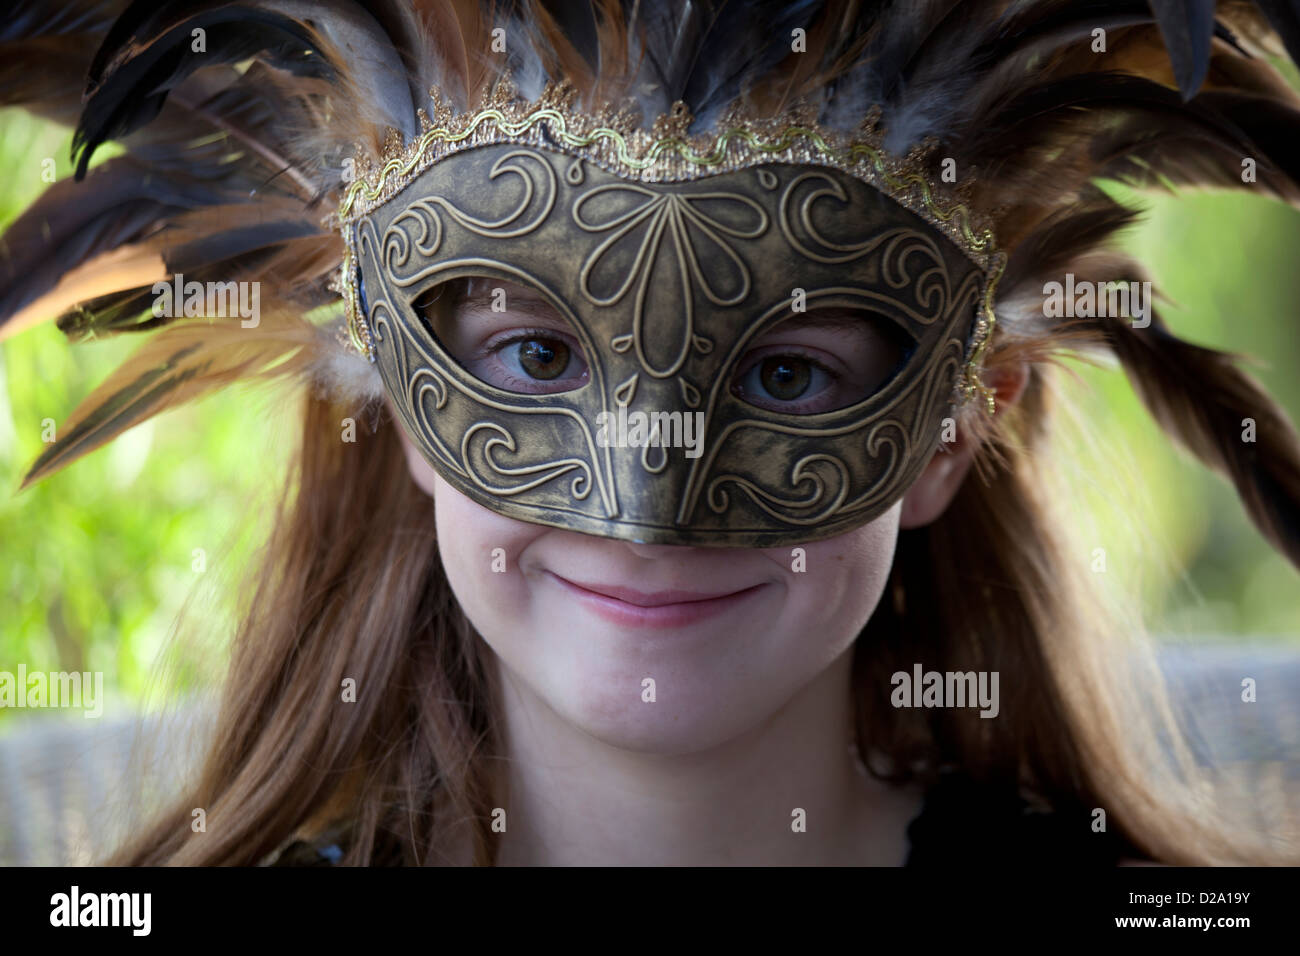 Smiling girl wearing an elaborate feathered mask Stock Photo